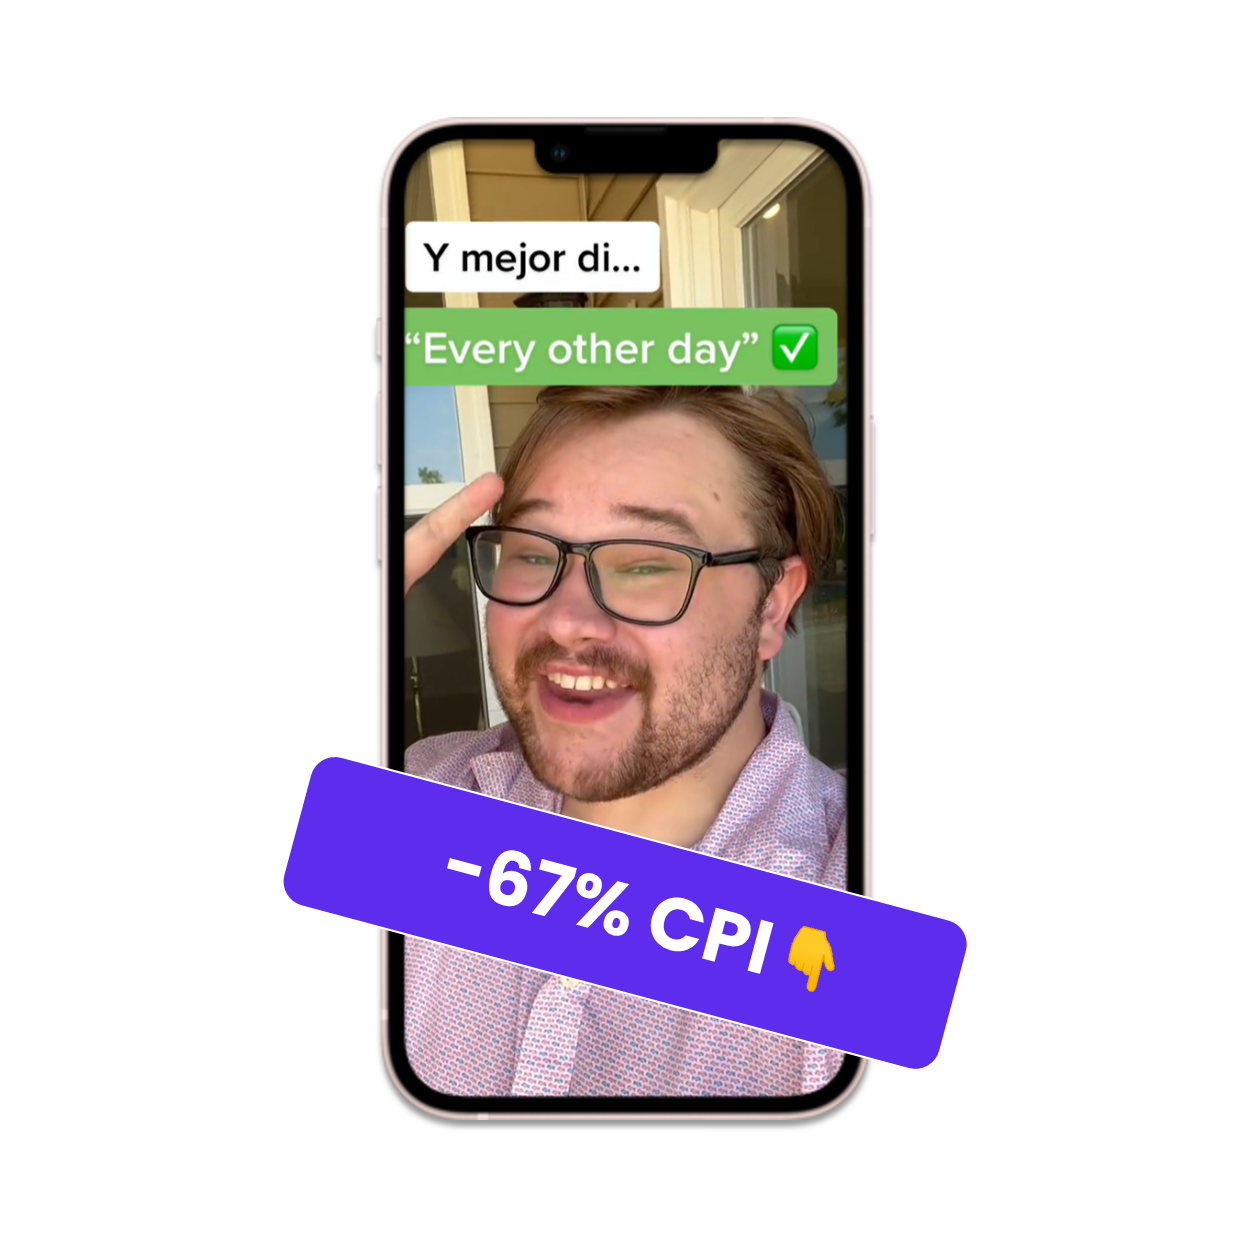 Man smiling with -67% CPI on screen